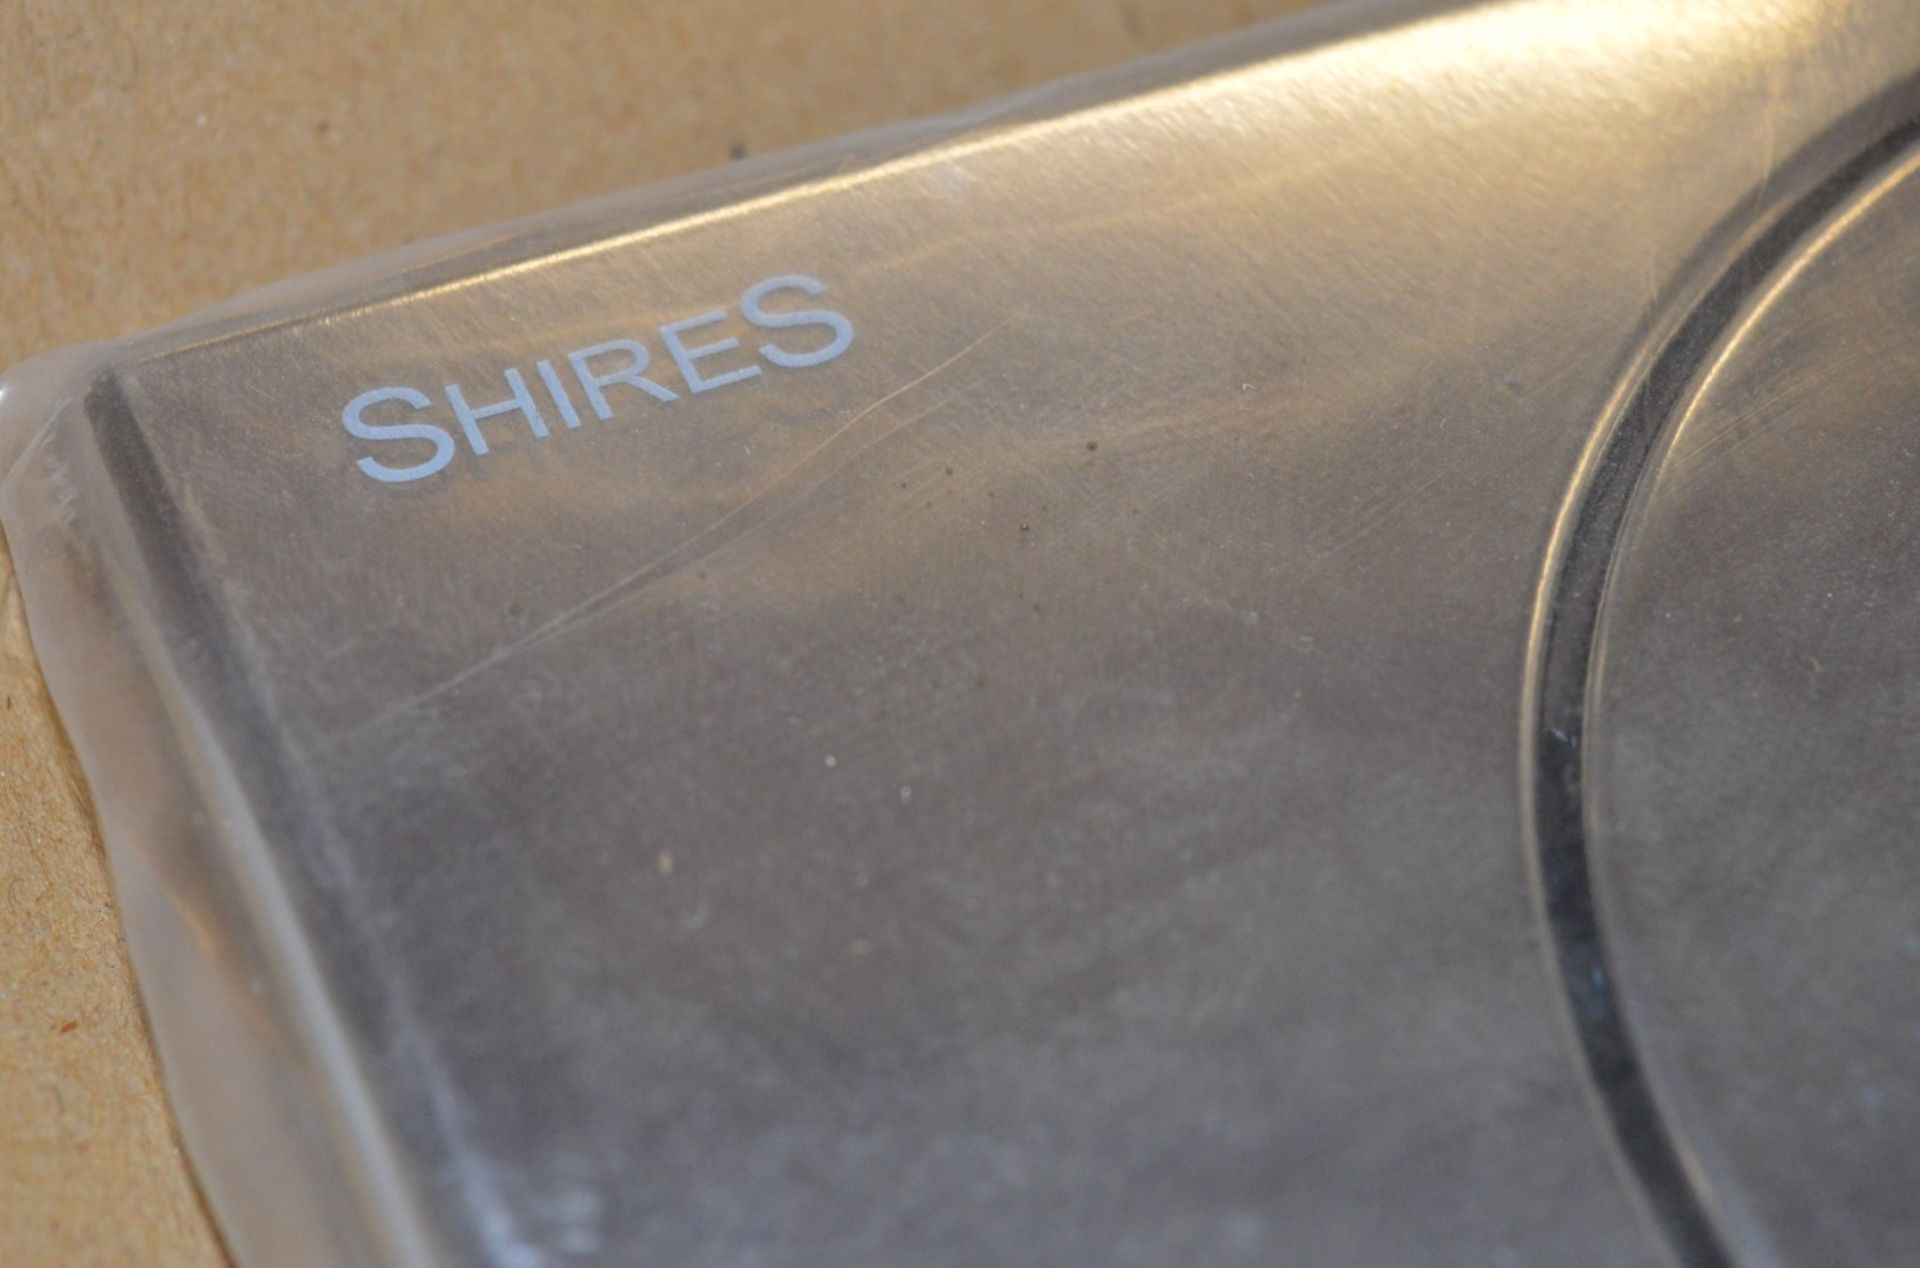 1 x Mepa Ellipse Actuator Toilet Flusher Plate - Shires Branded - Modern Chrome Finish - New and - Image 2 of 5